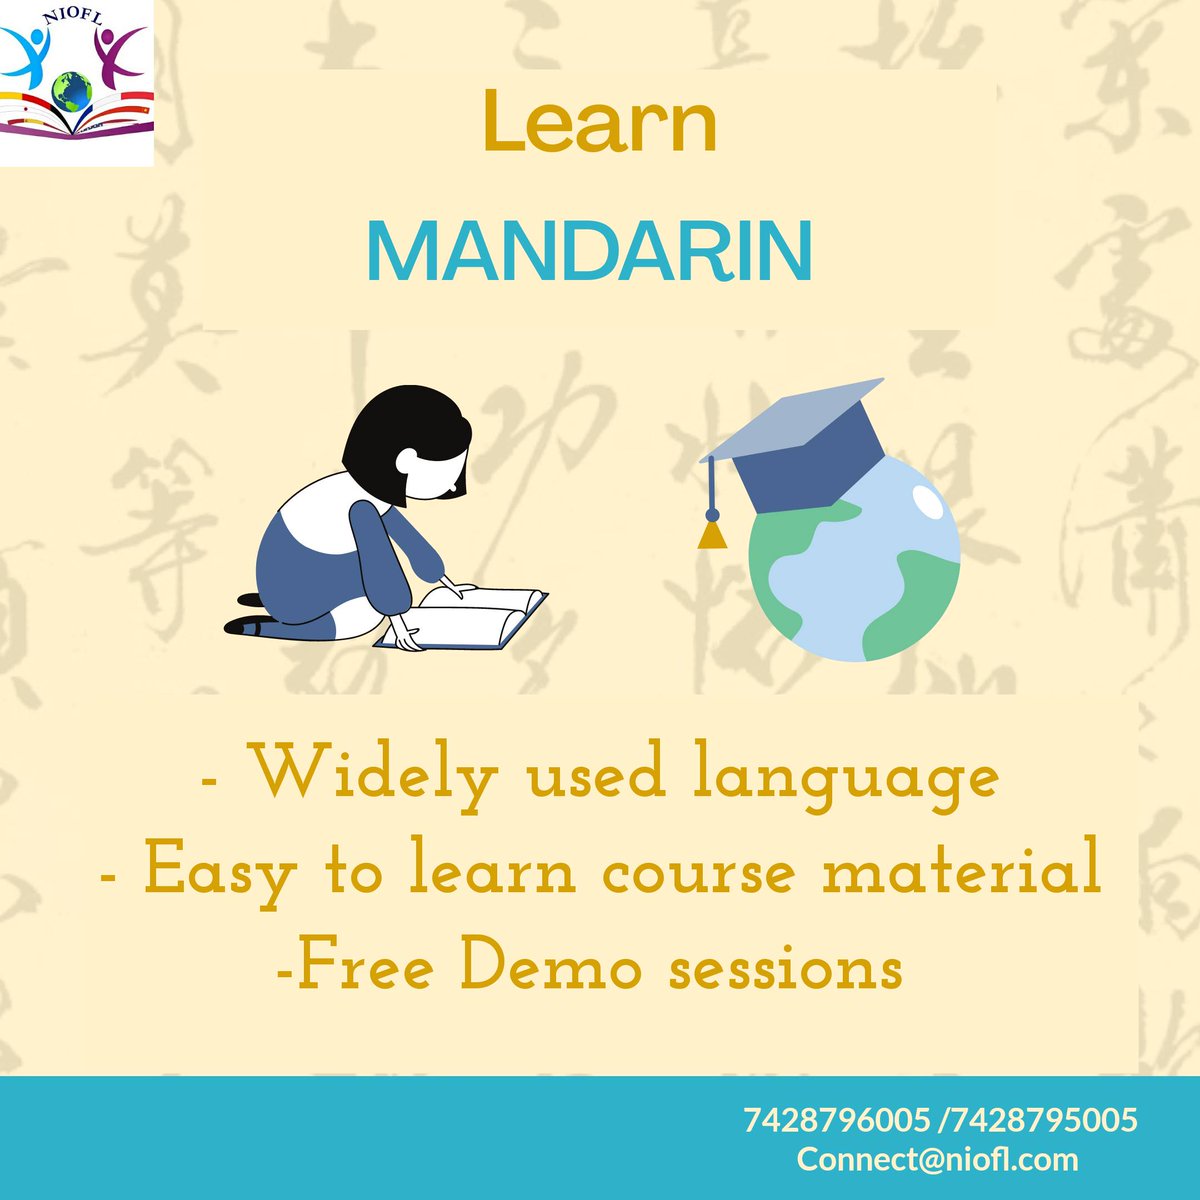 Learn MANDARIN today! 

- Widely used a
Language ✔️
- Easy to learn course material
- Free Demo sessions💯

Contact NIOFL now
7428796005 /7428795005

Connect@niofl.com 

#learnlanguages #learnmandarin #learnmandarinonline #learnmandarinchinese  #learnforiegnlanguage